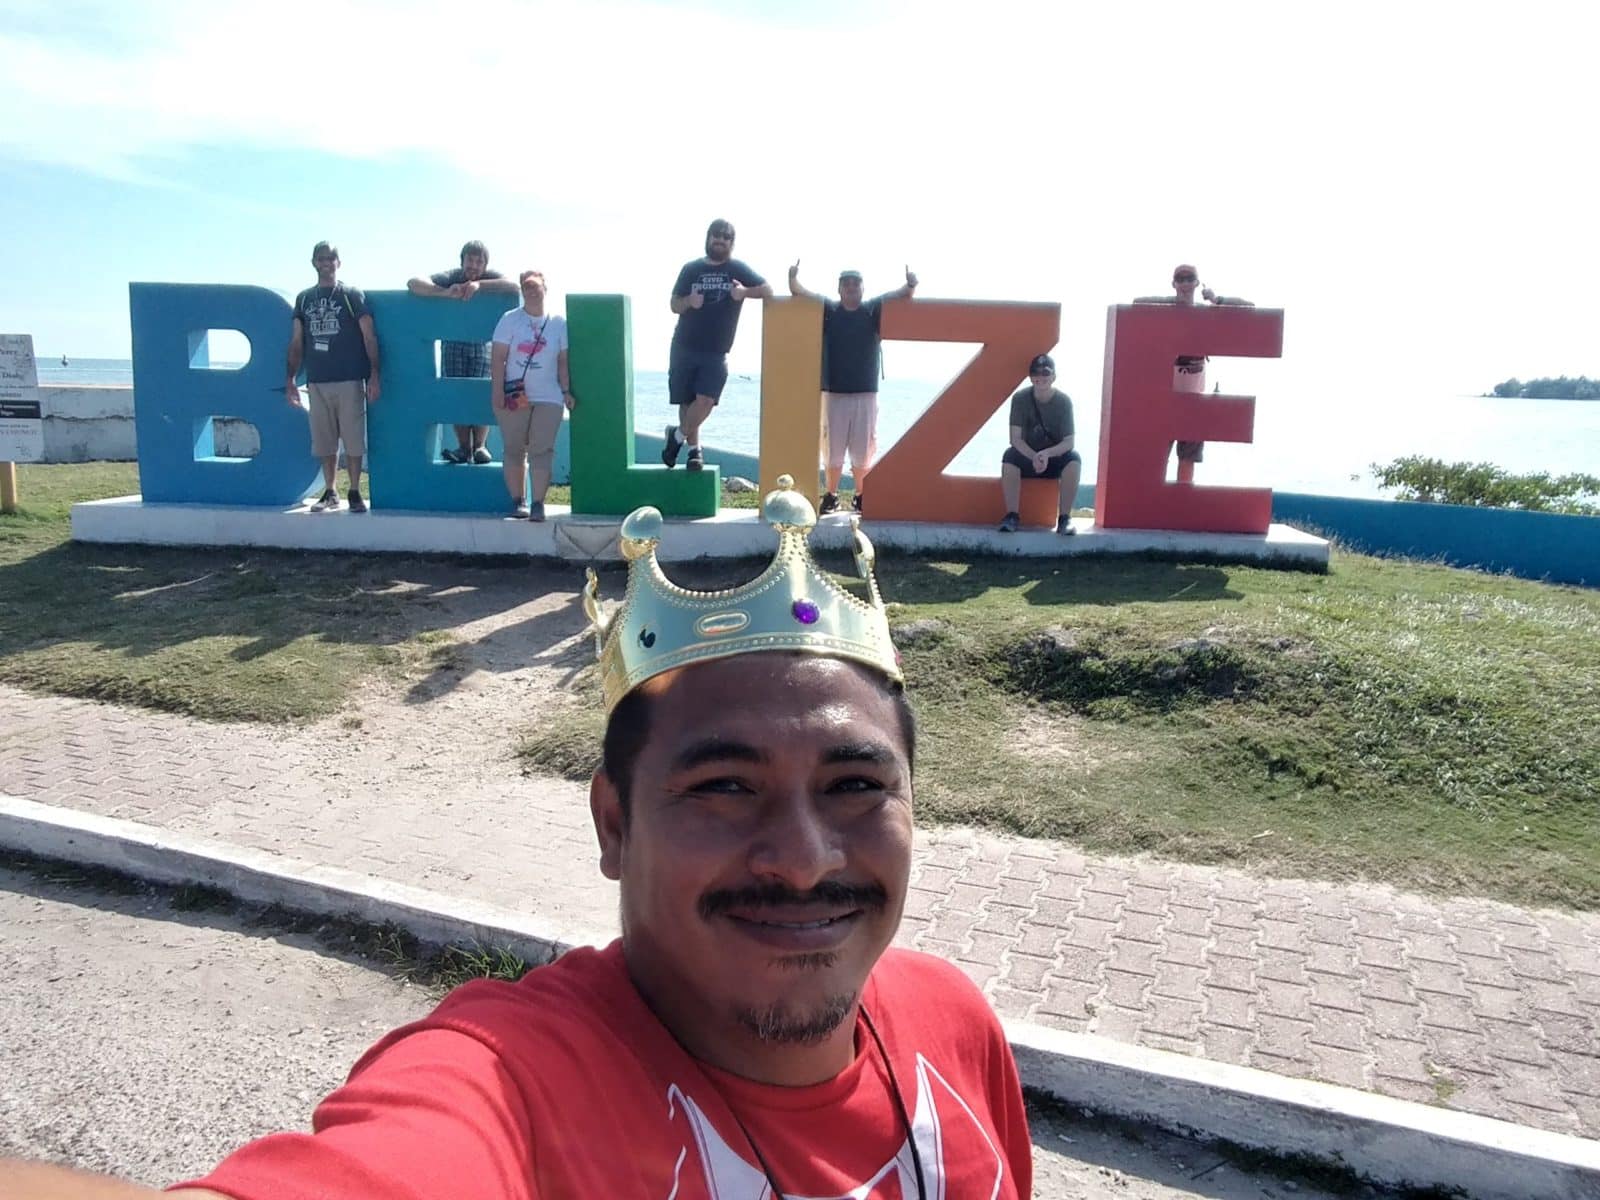 Tour Guide King David poses for selfie with family at Belize sign.